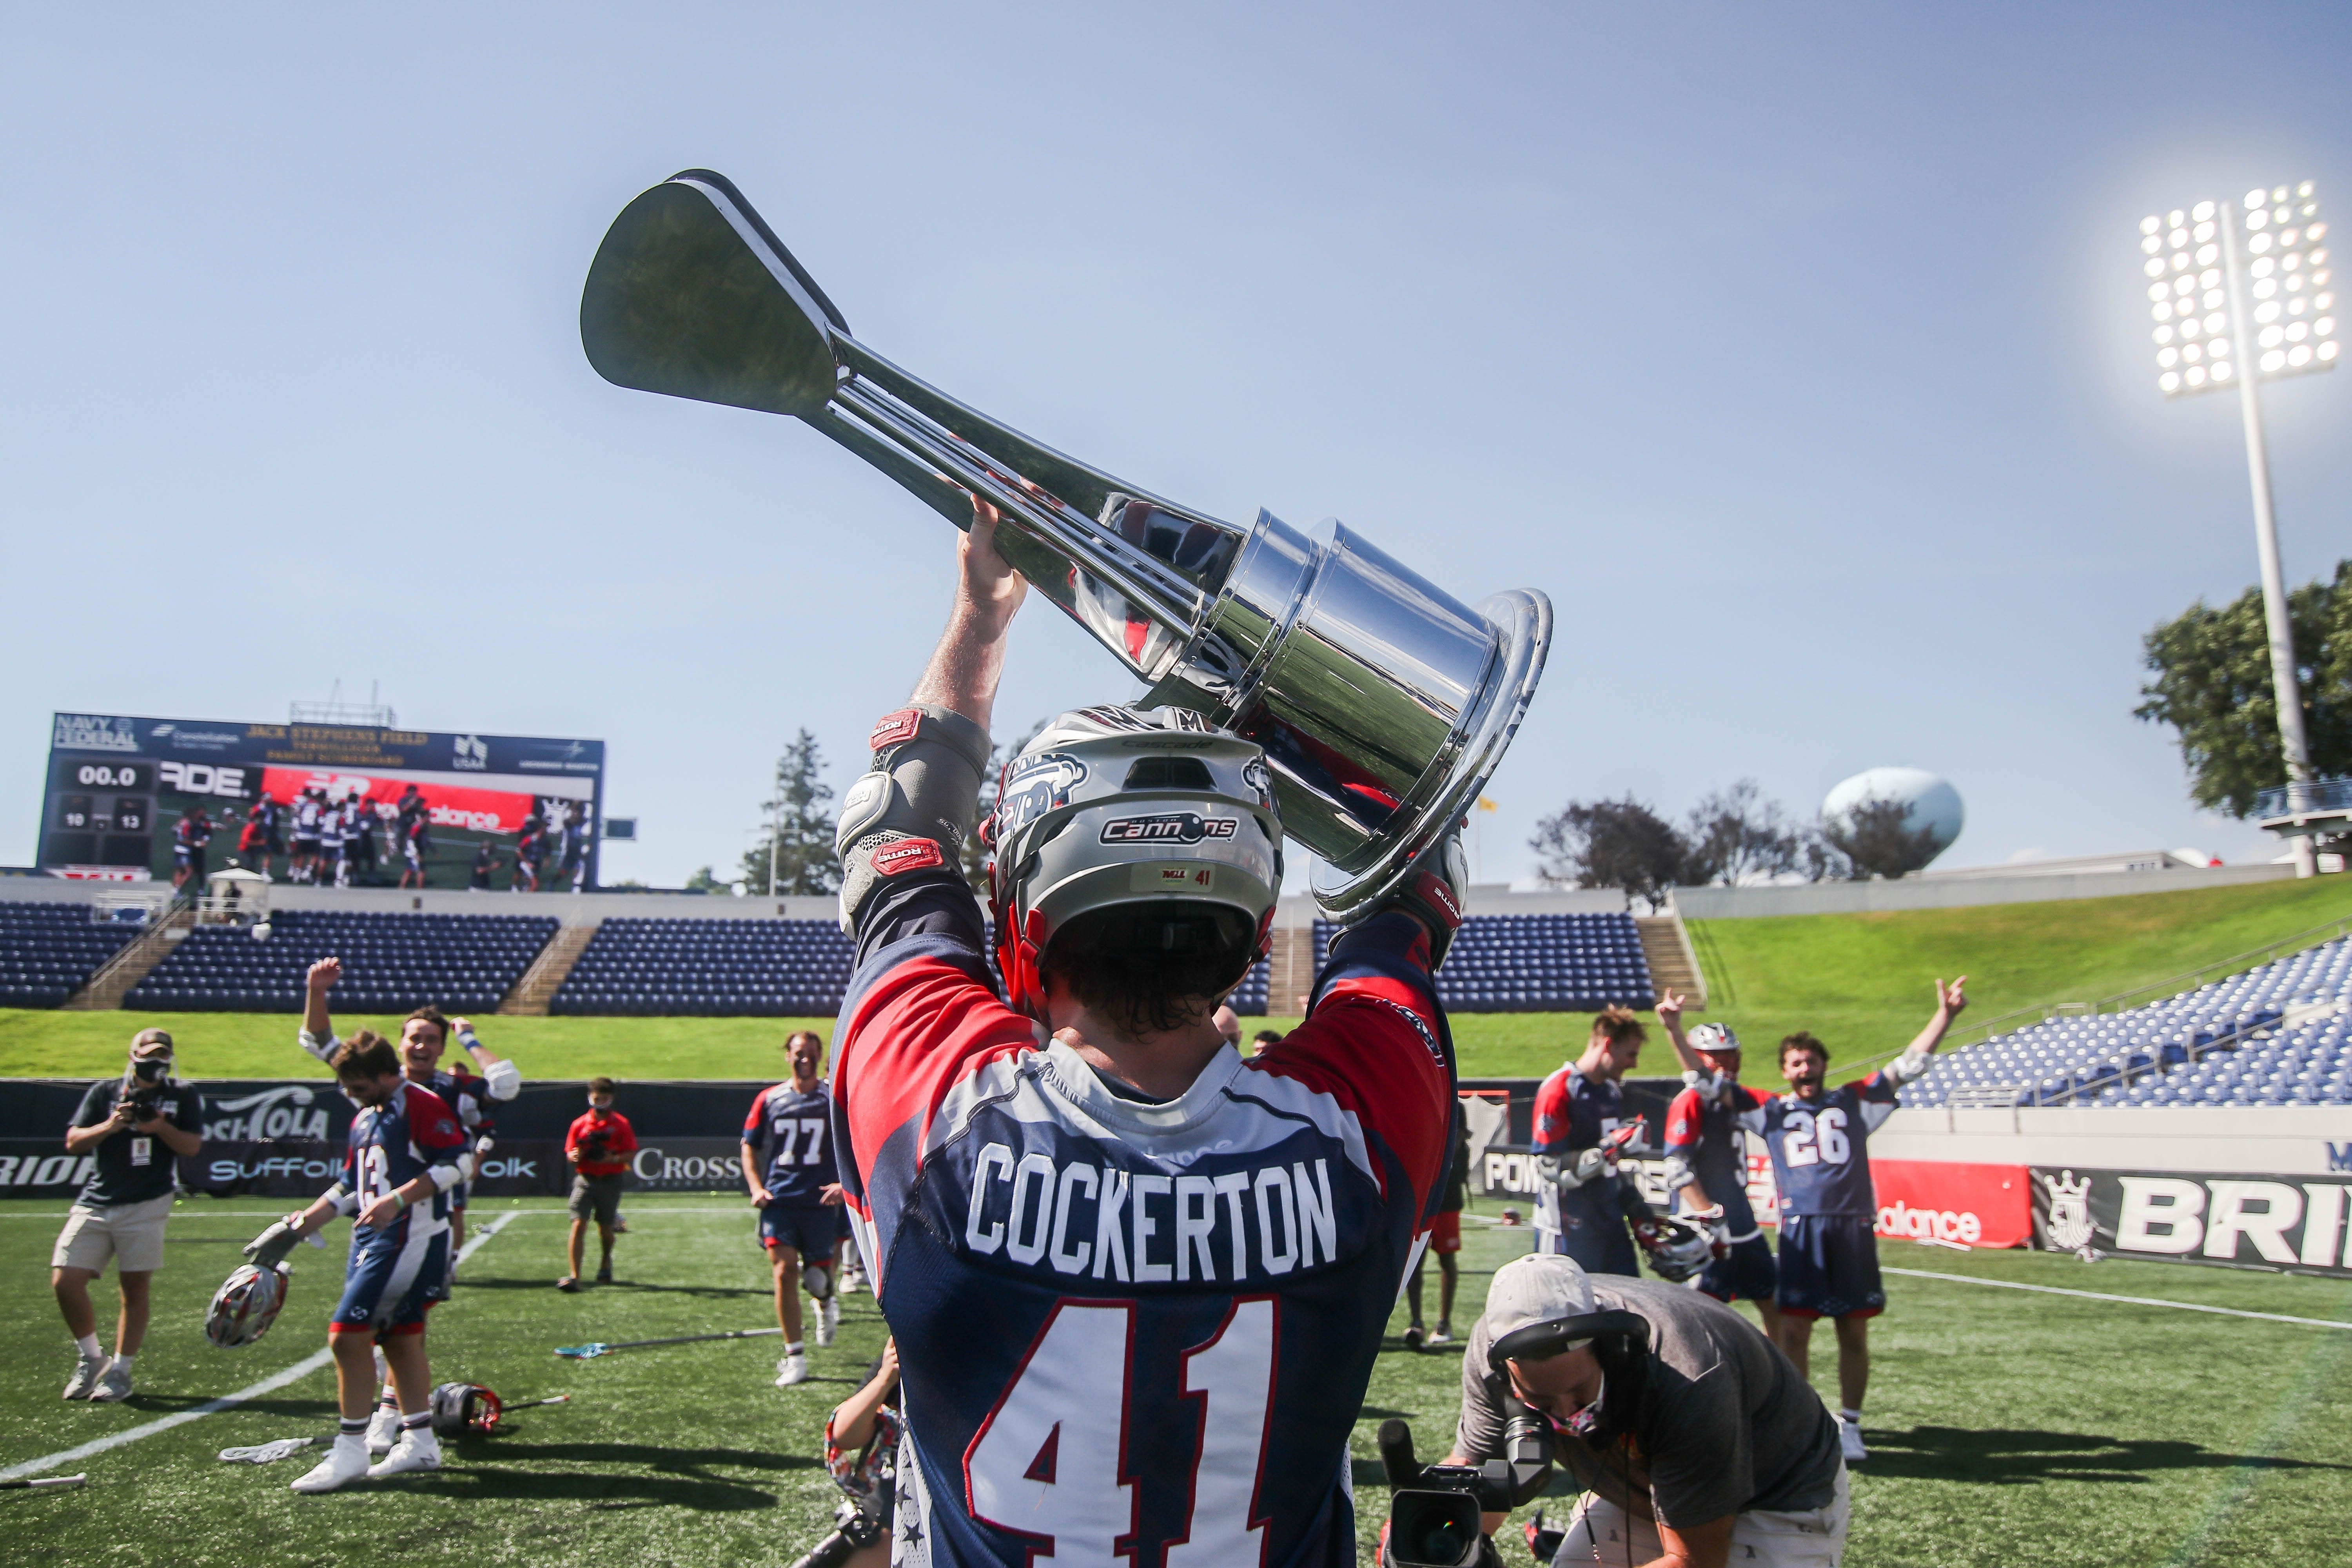 Boston Cannons Proves Best in 2020 MLL Championship